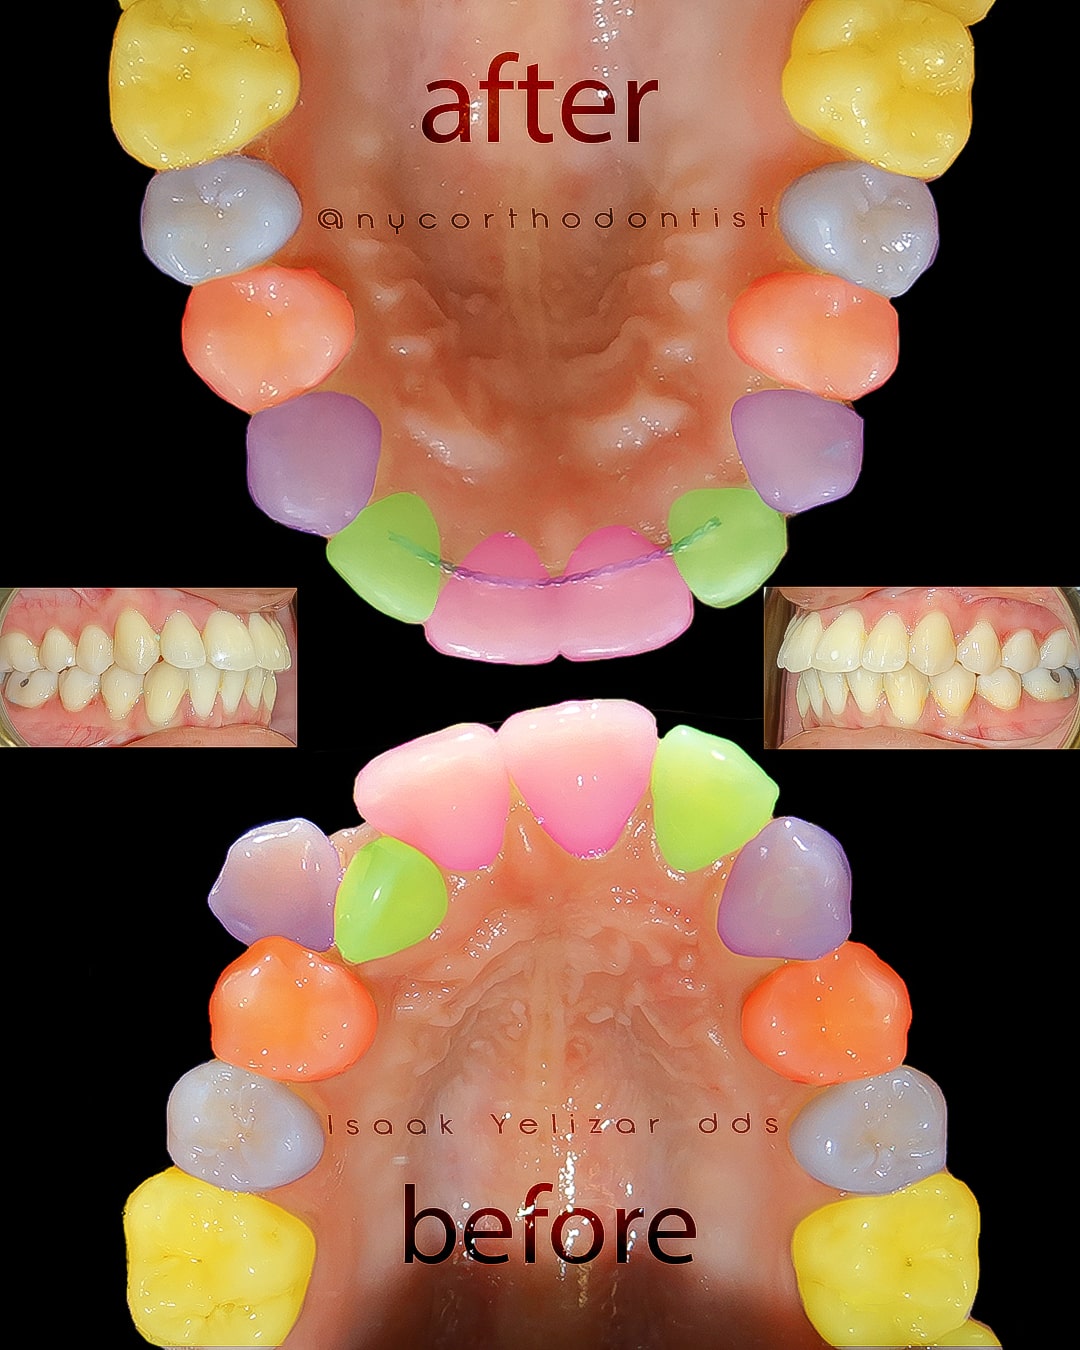 Inside of bottom teeth and profile of smile before and after treatment for crowding